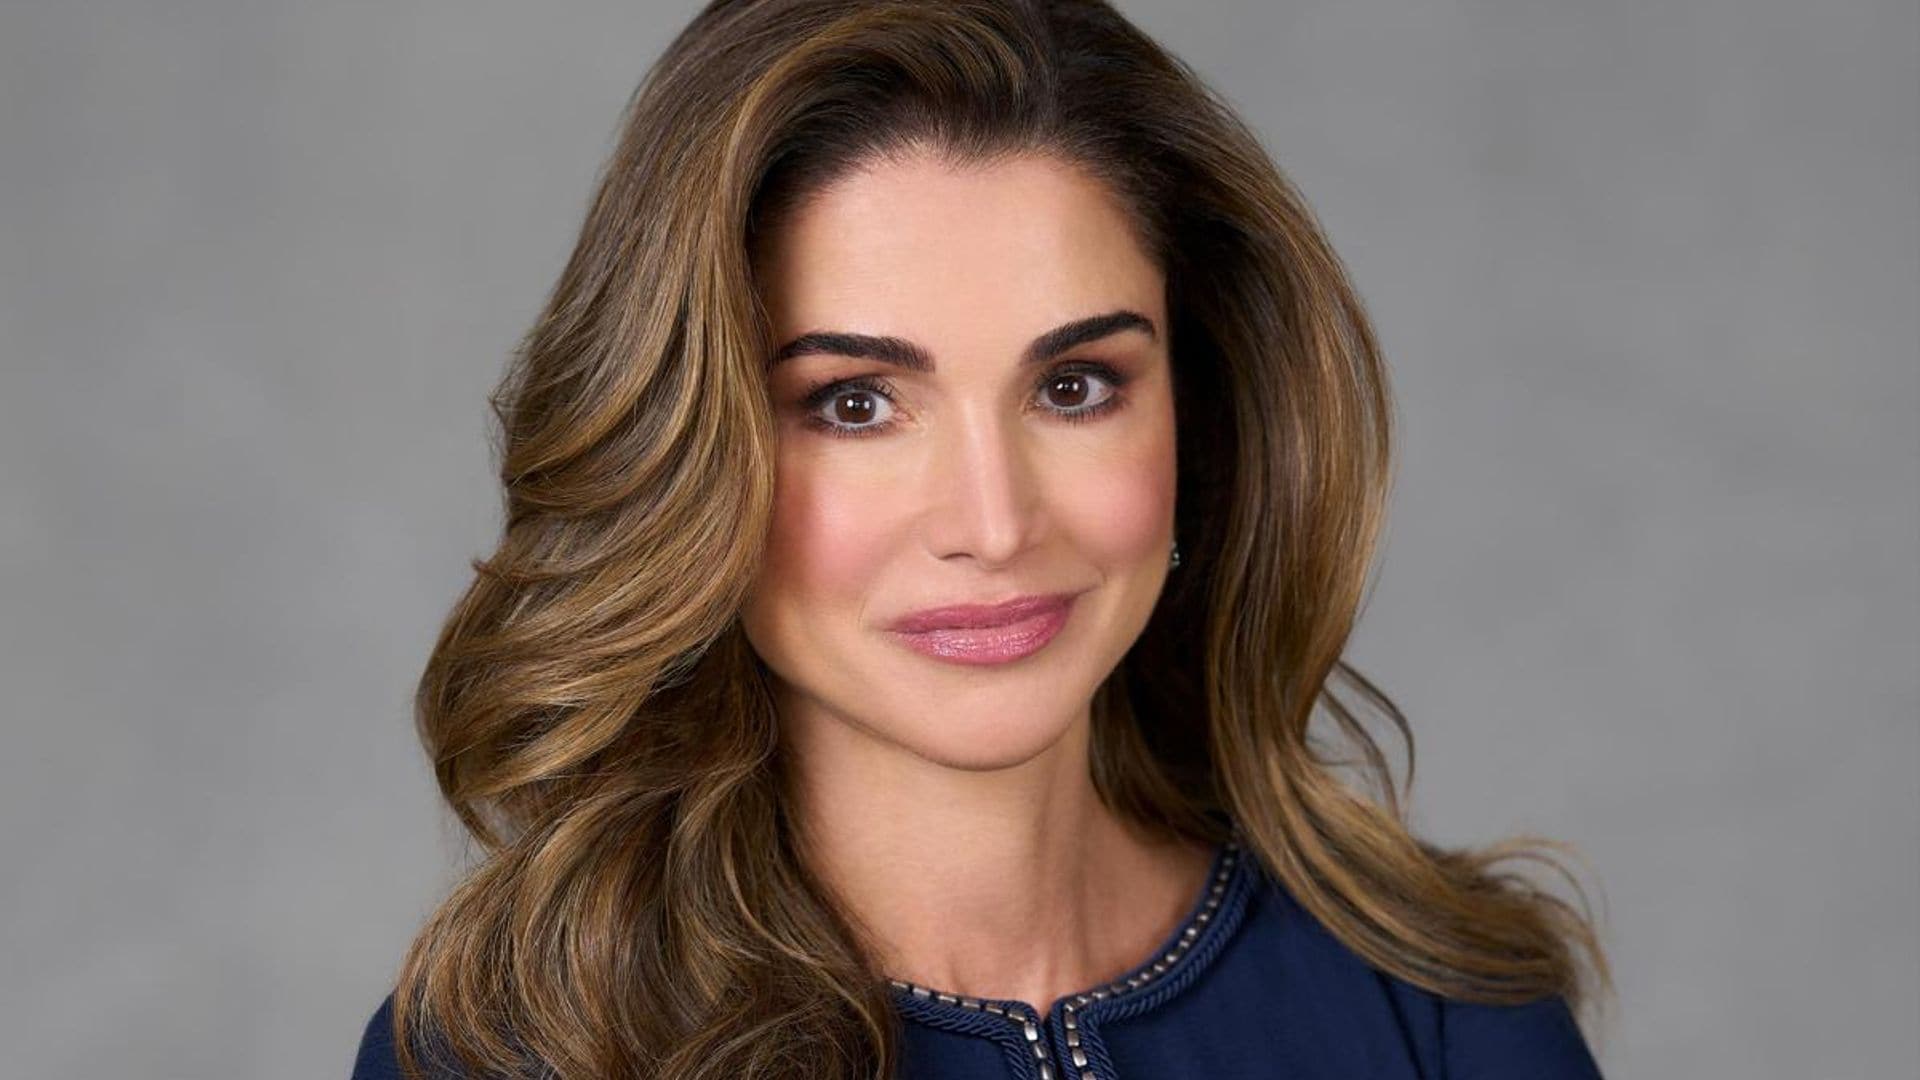 Queen Rania surprised ahead of birthday: See photo of her ‘lovely surprise’